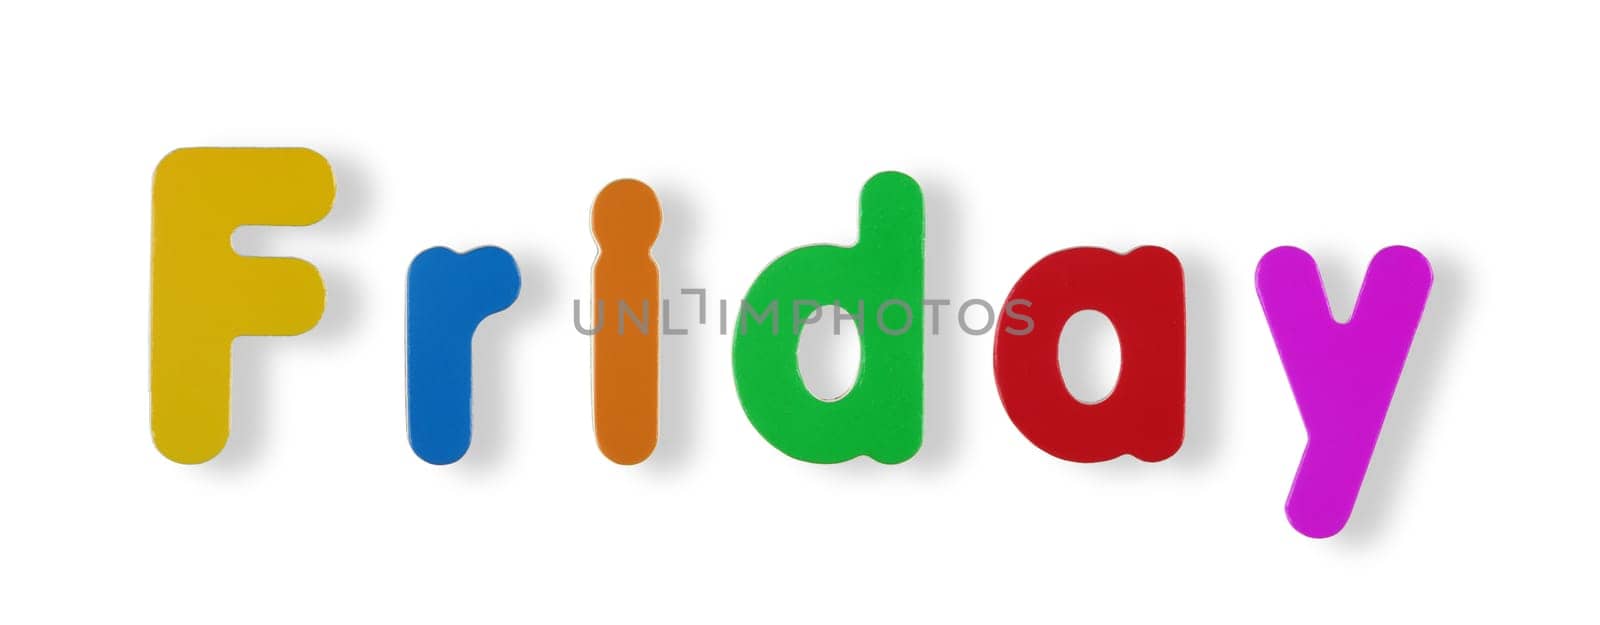 A Friday word in coloured magnetic letters on white with clipping path to remove shadow